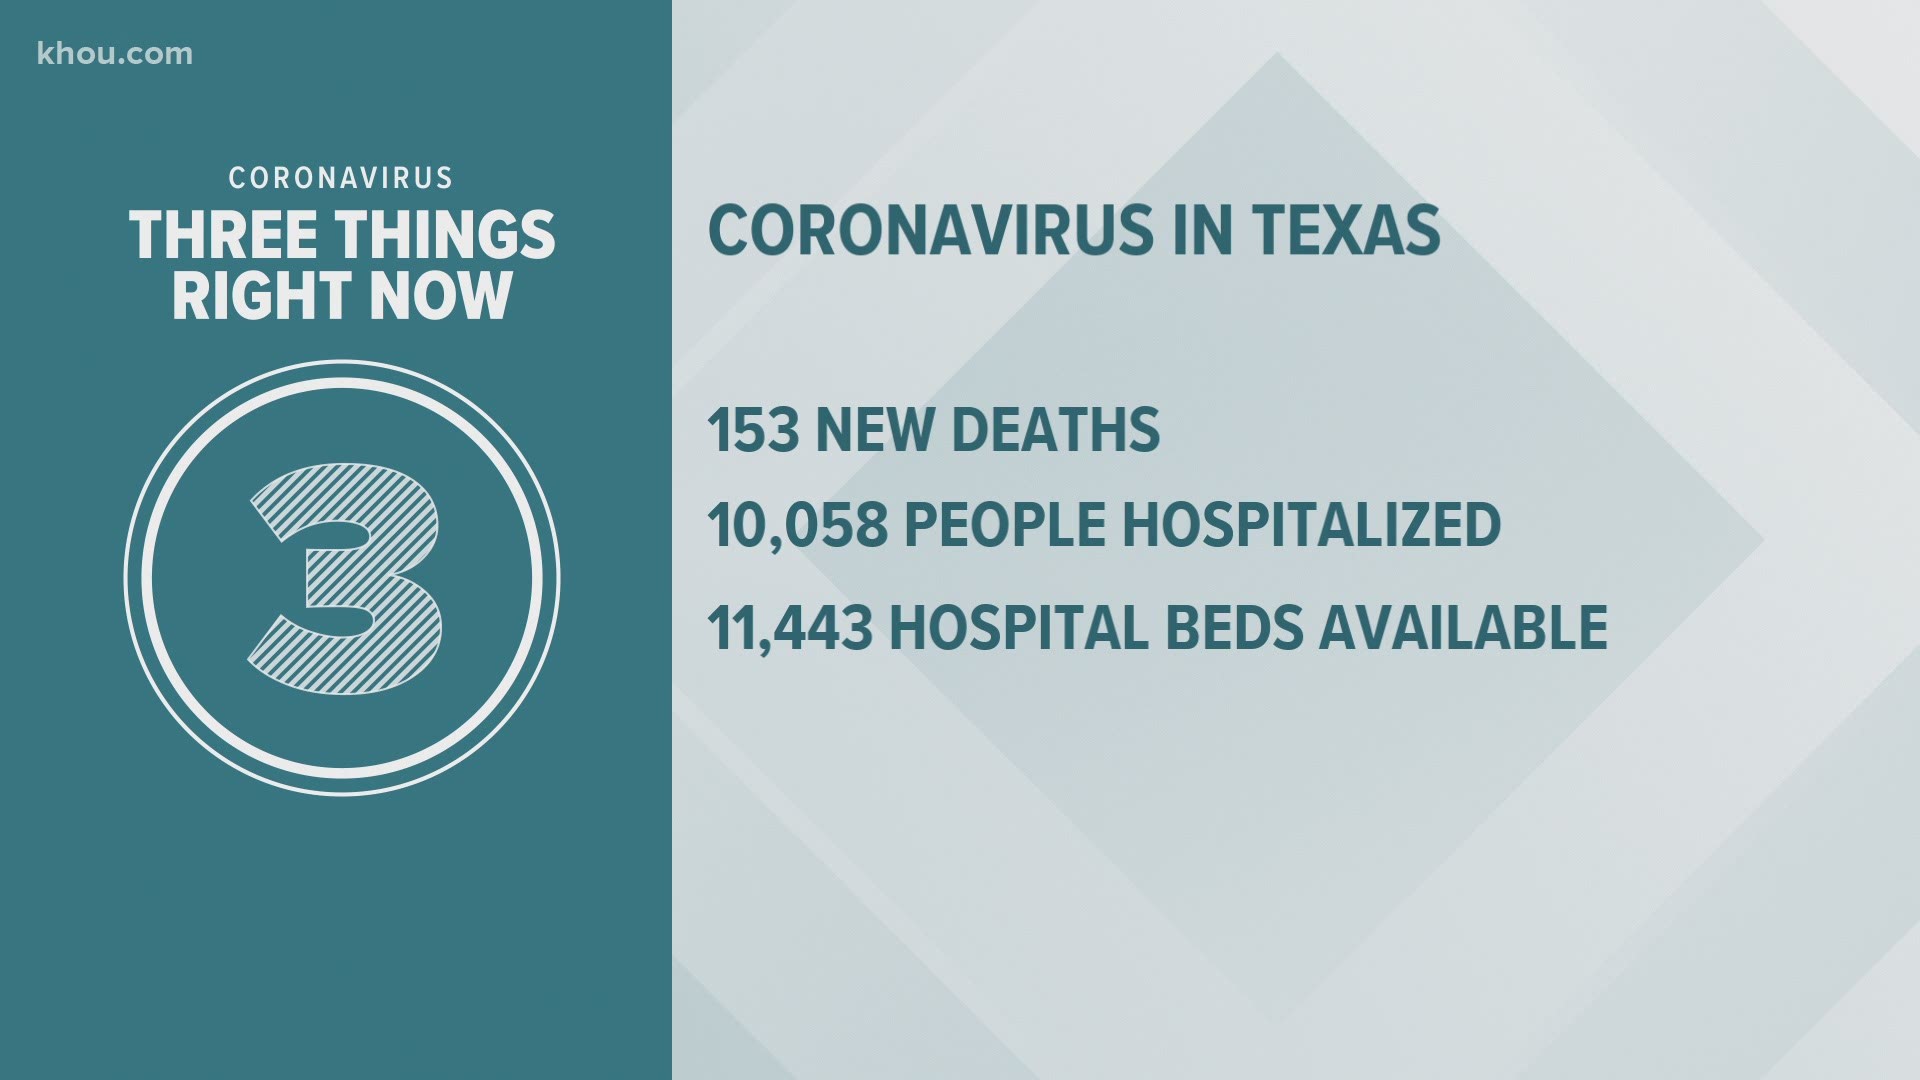 Infectious disease expert Dr. Peter Hotez says the virus is making its way to rural and suburban areas of Texas.